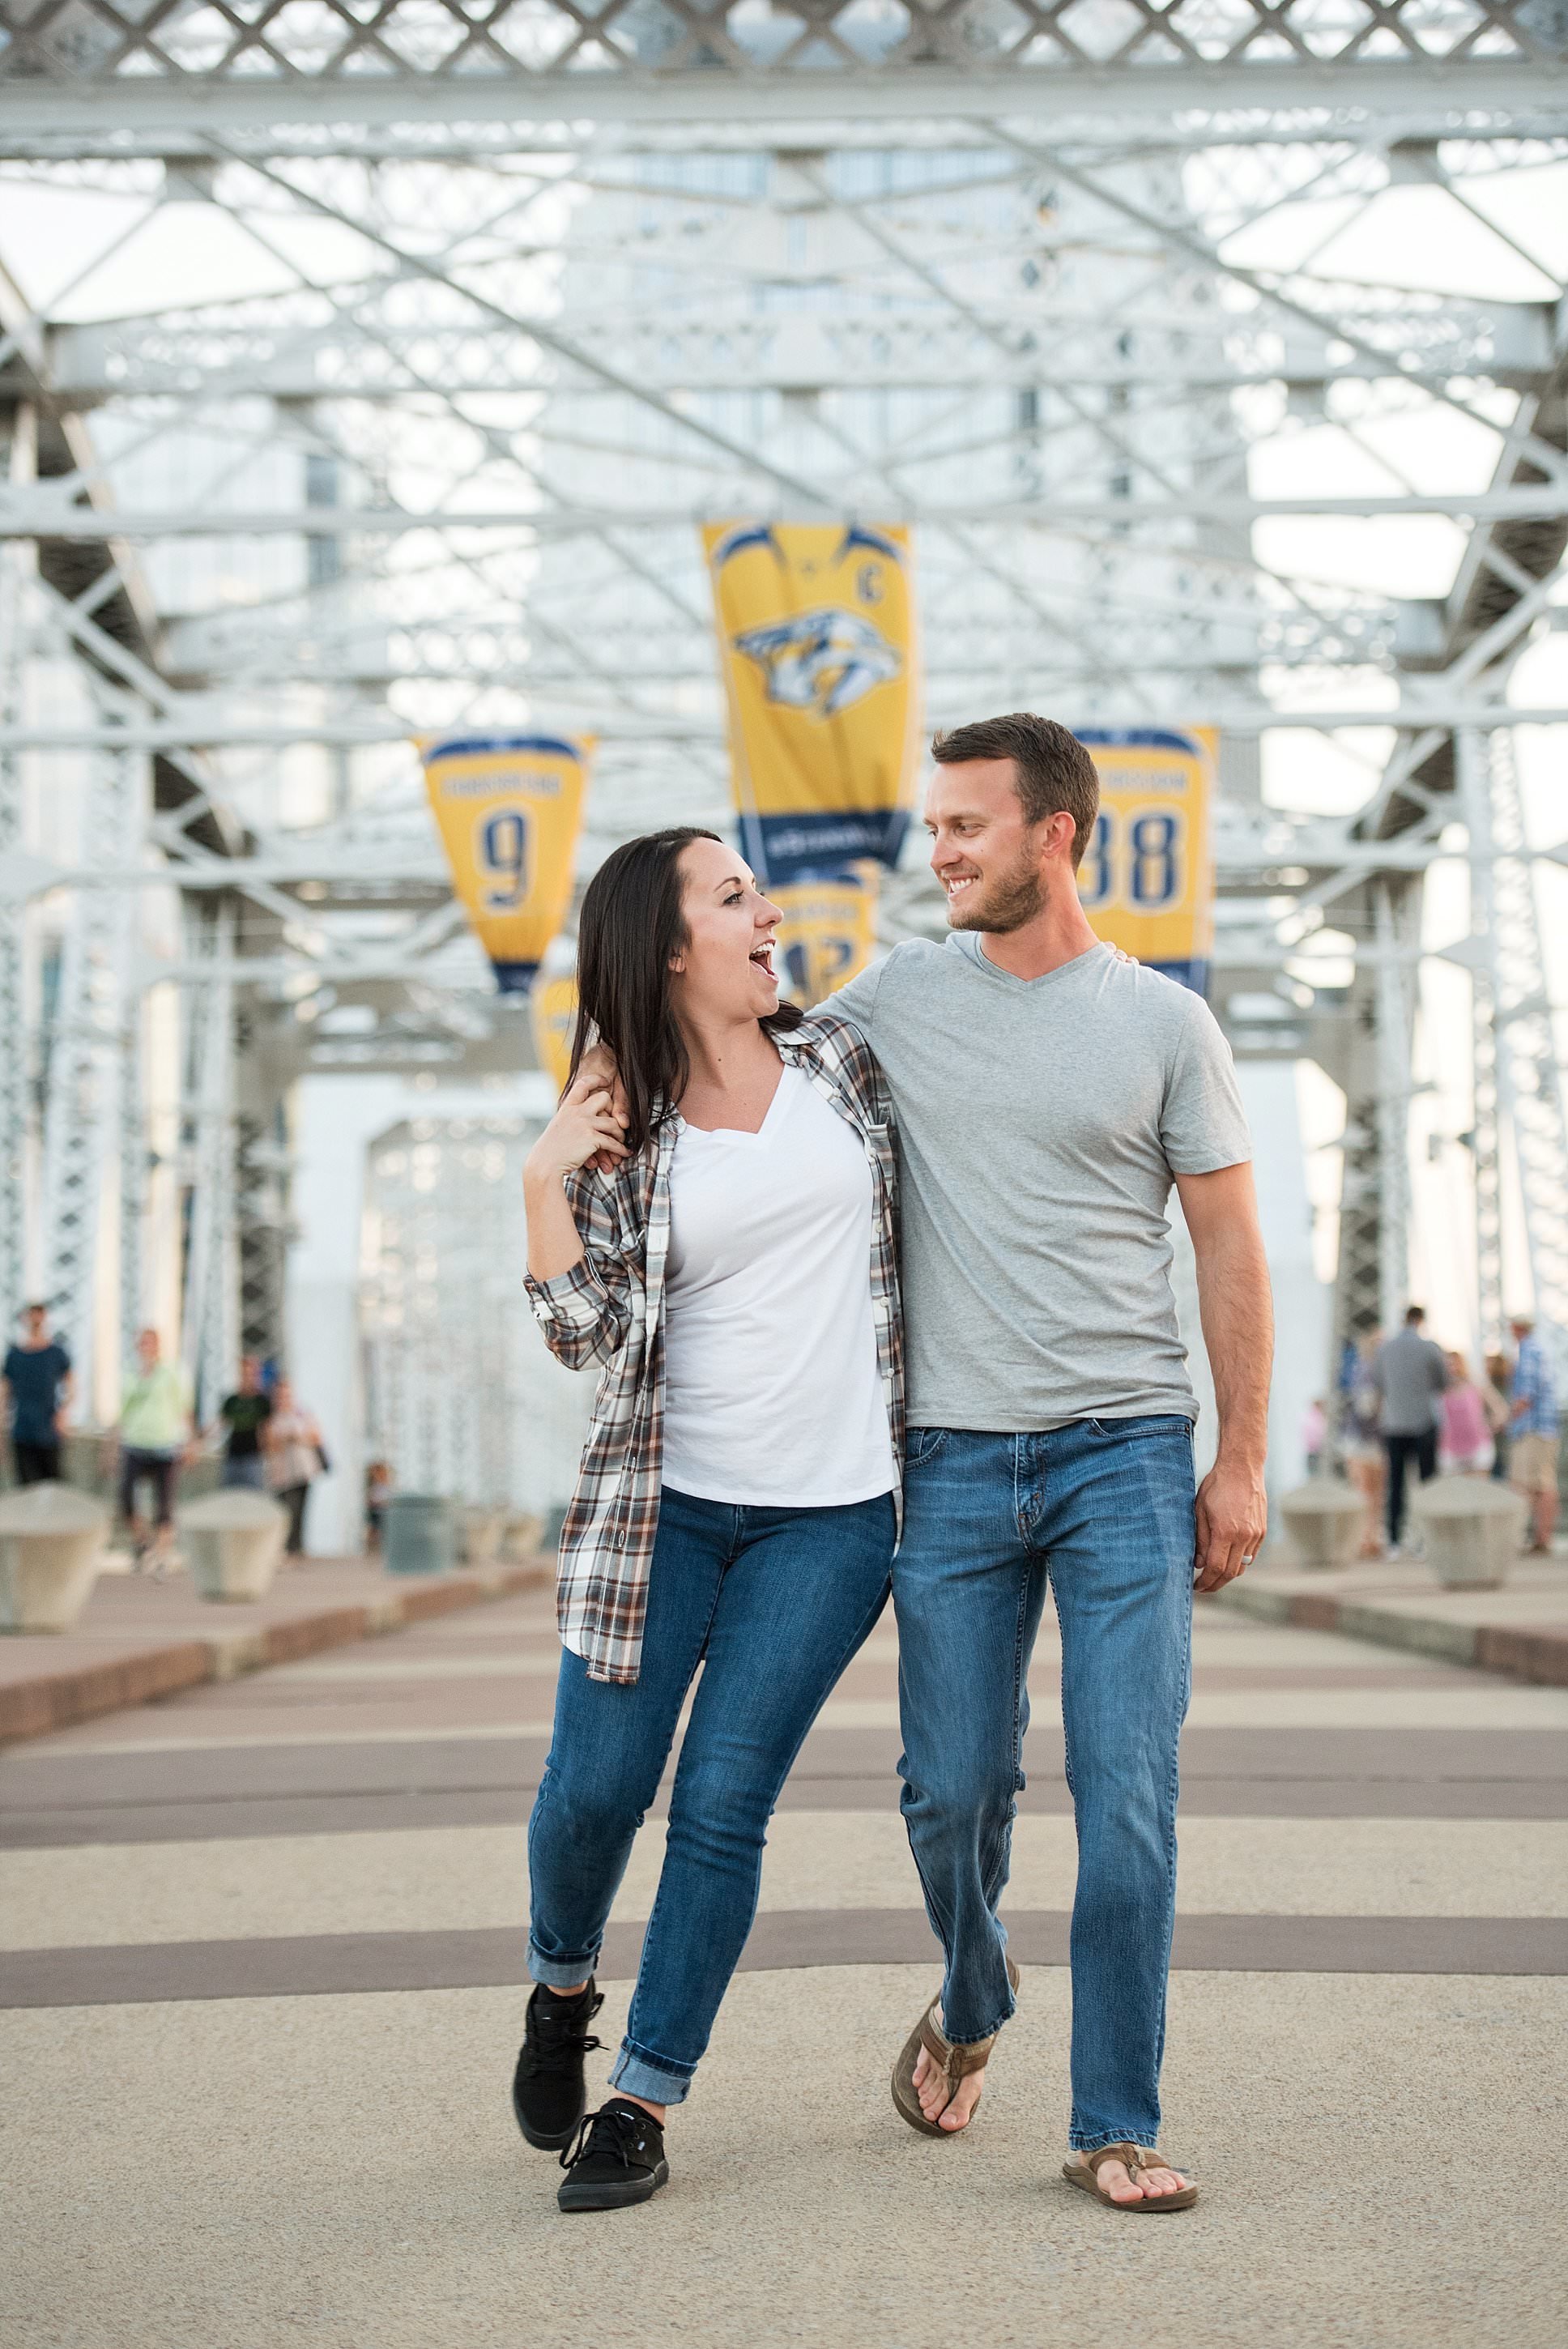 Couple strolling the pedestrian bridge in downtown Nashville with the Predators banners waving overhead